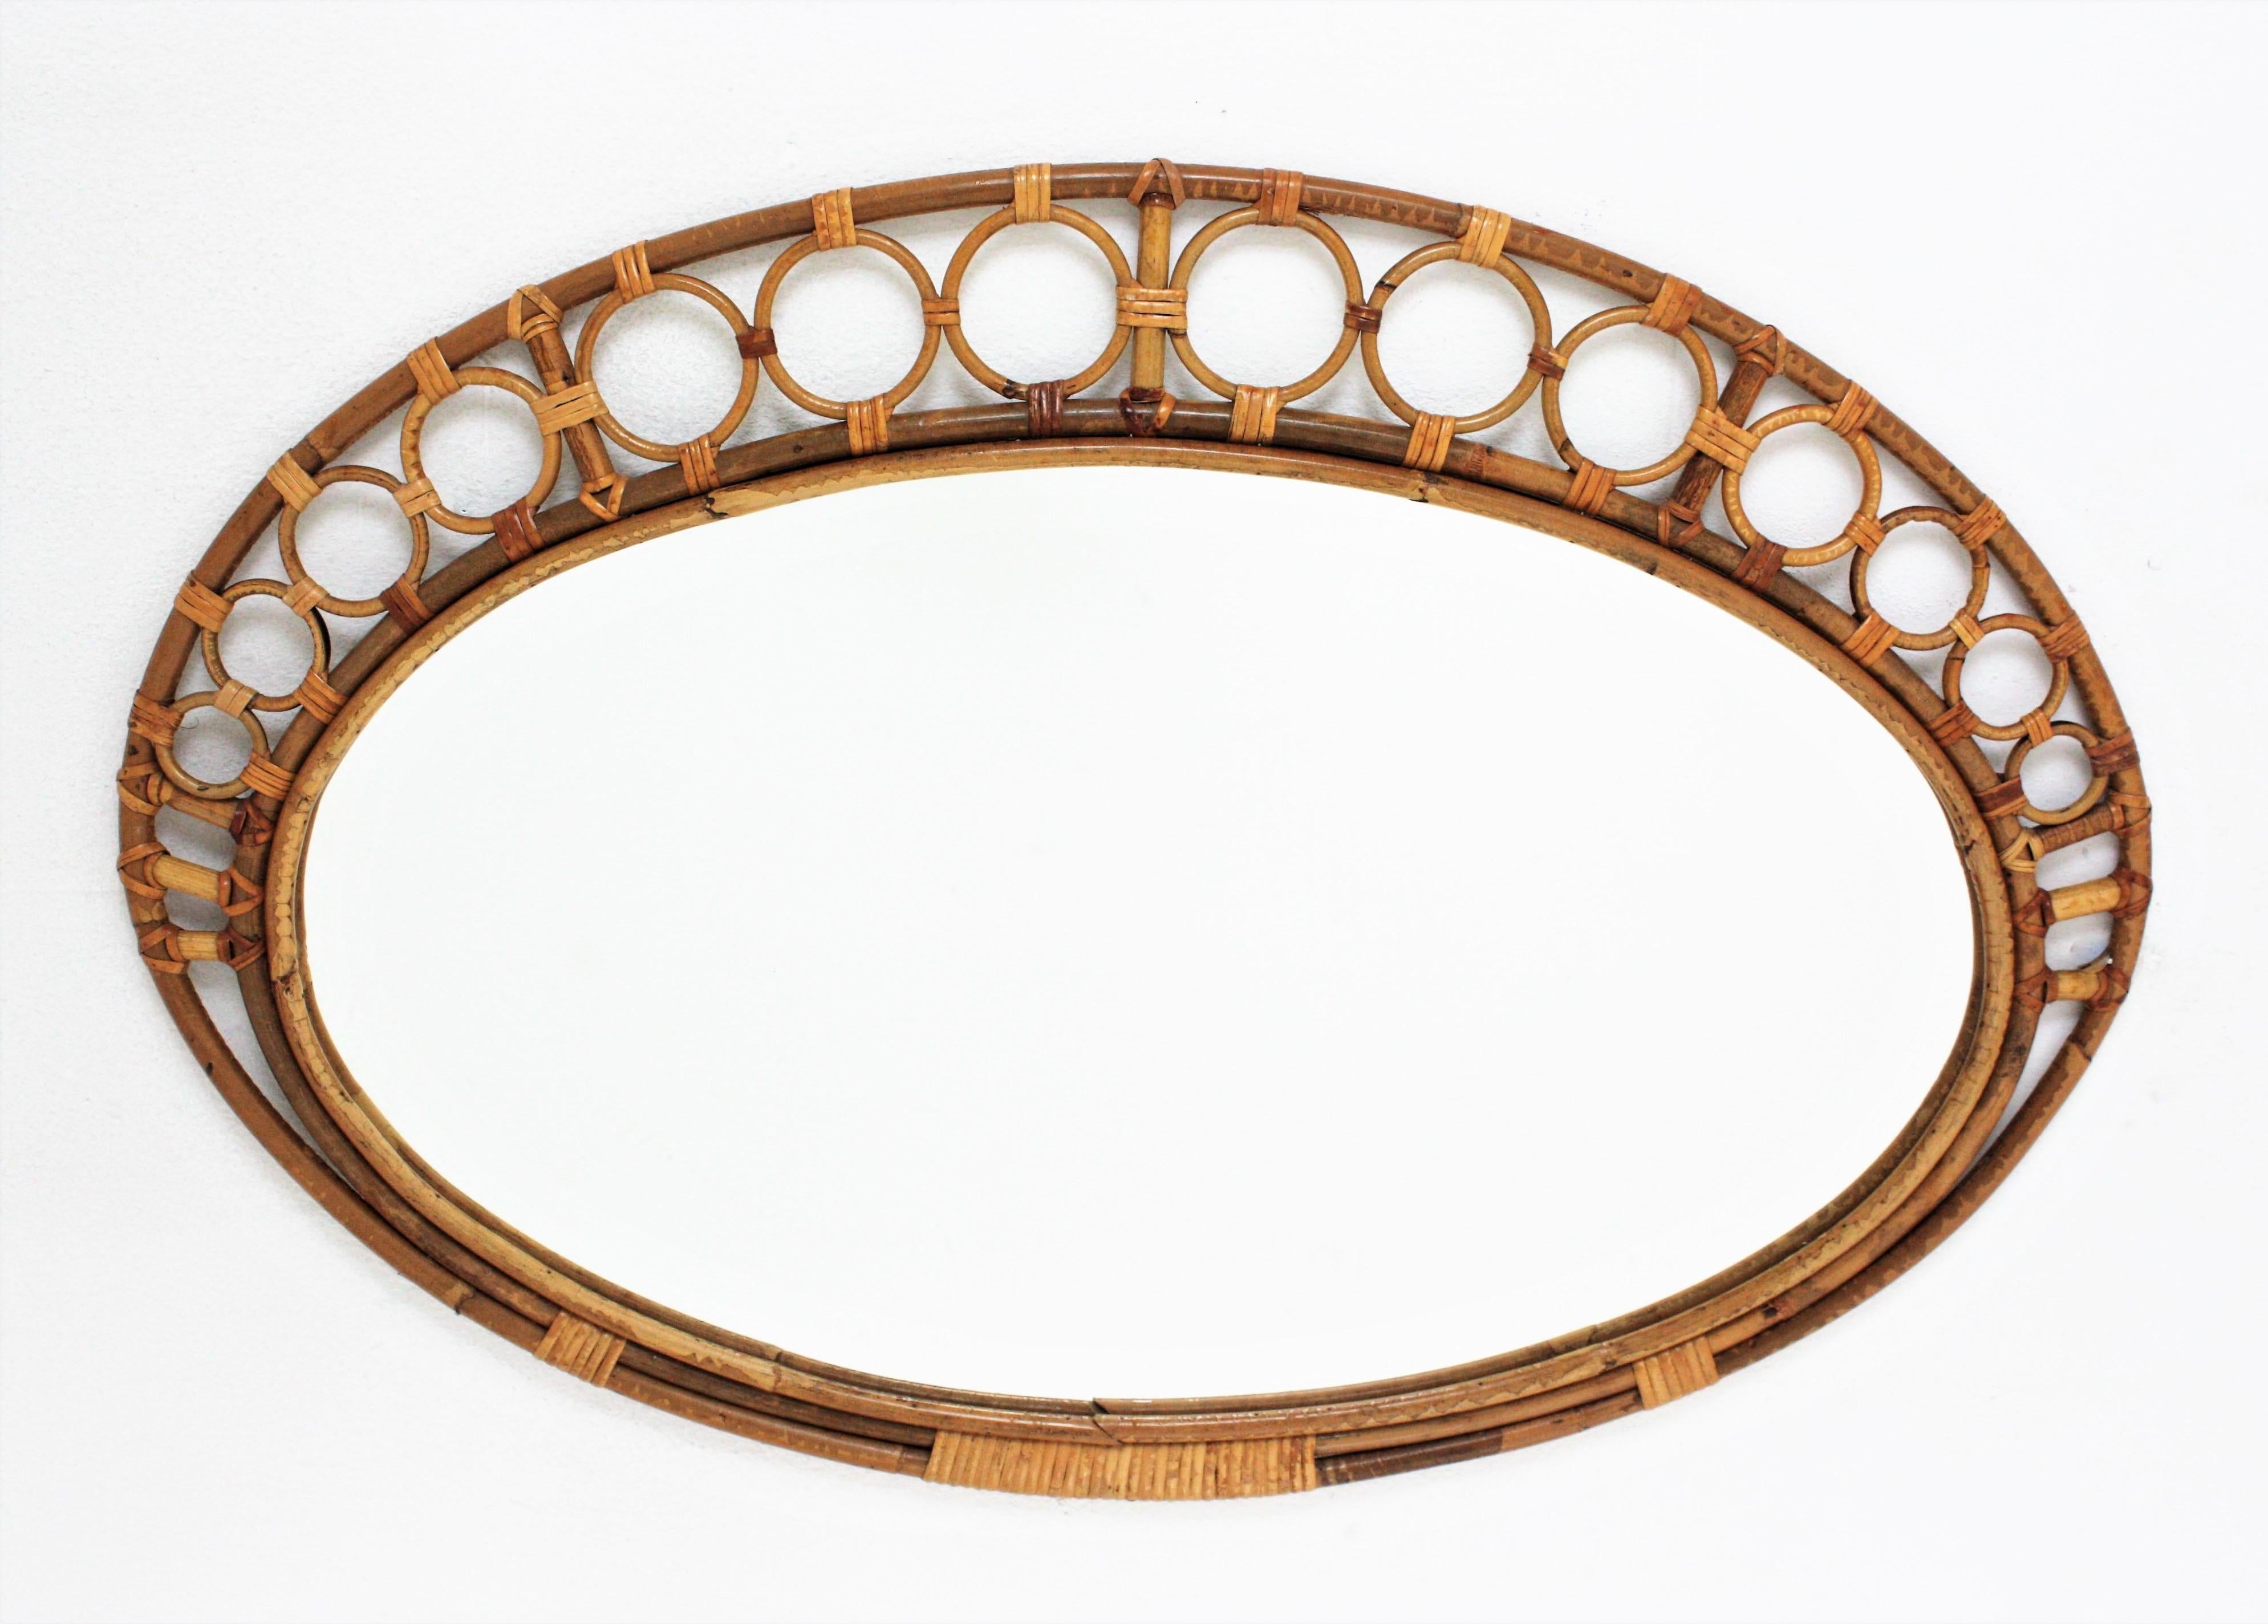 Eye-catching Mid-Century Modern mirror handcrafted in bamboo and rattan with rings detailings surrounding the frame.
This Mediterranean wall mirror features an oval bamboo frame surrounded by rattan circle decorations decreasing in size from the